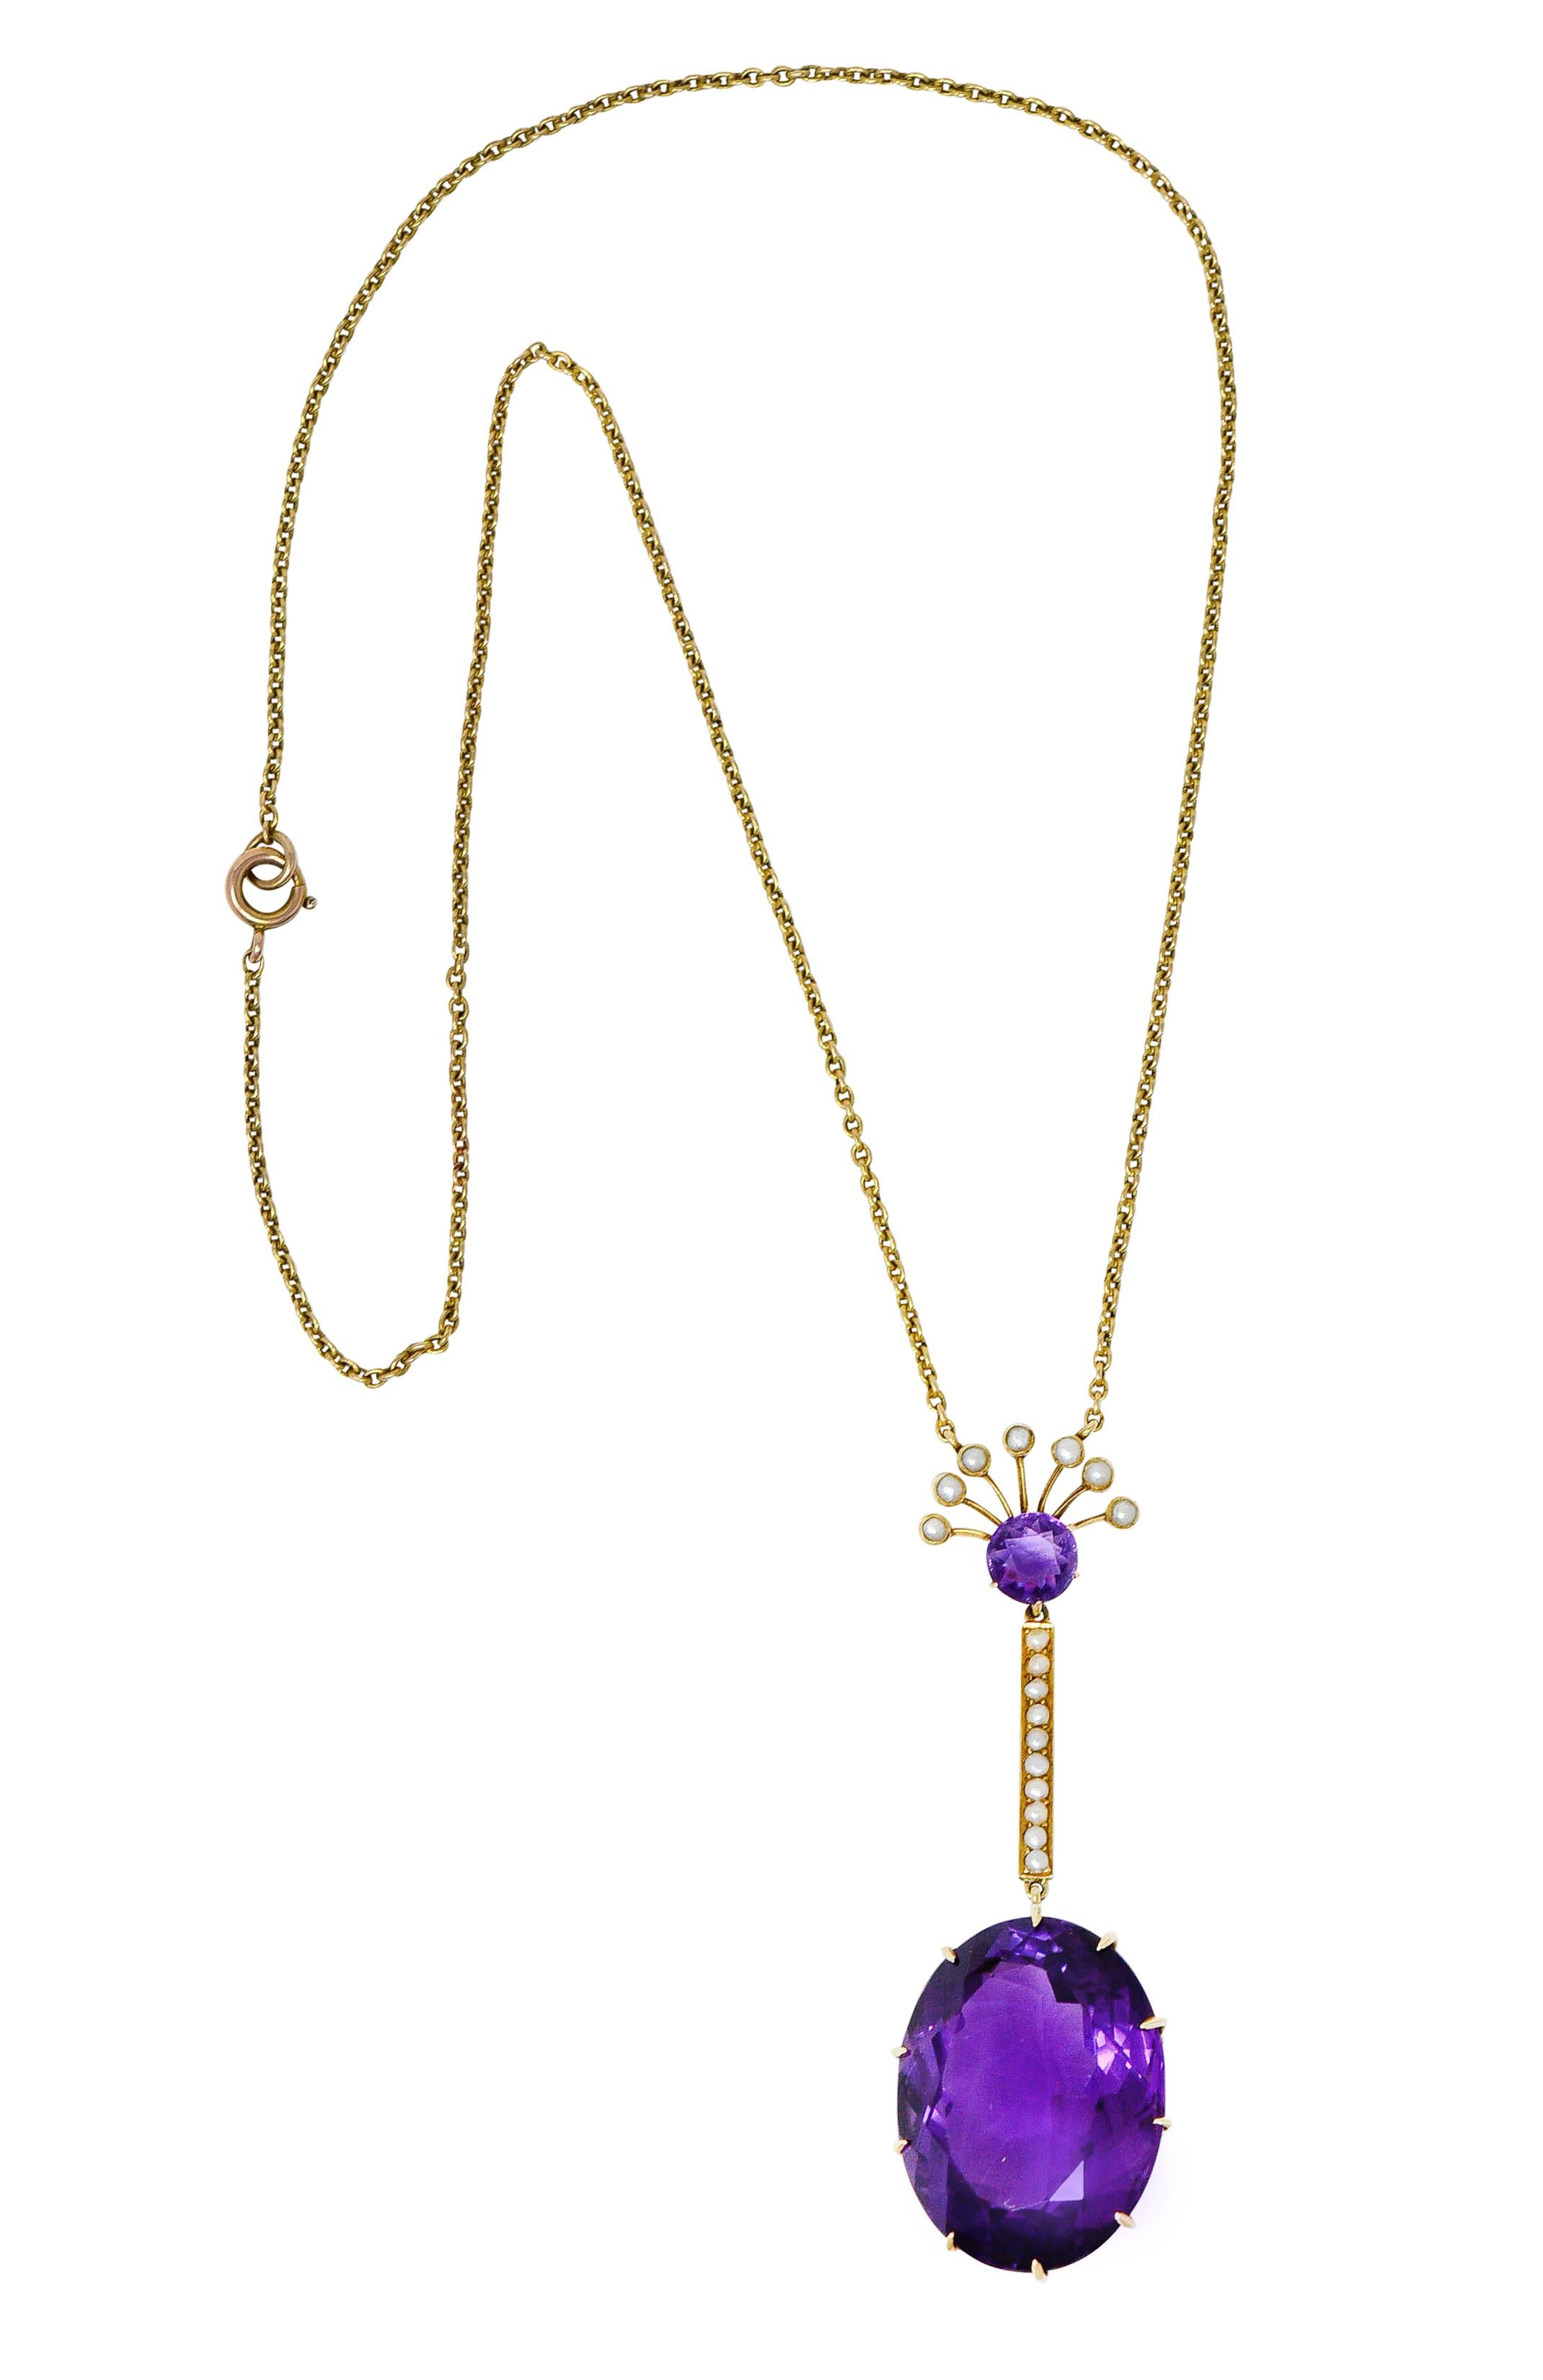 Cable chain necklace features an elongated drop

Surmount is a 7.0 mm round cut amethyst with a fanned motif accented by 2.0 mm pearls

Suspending a streamlined bar bead set with additional 1.5 mm natural freshwater pearls; all